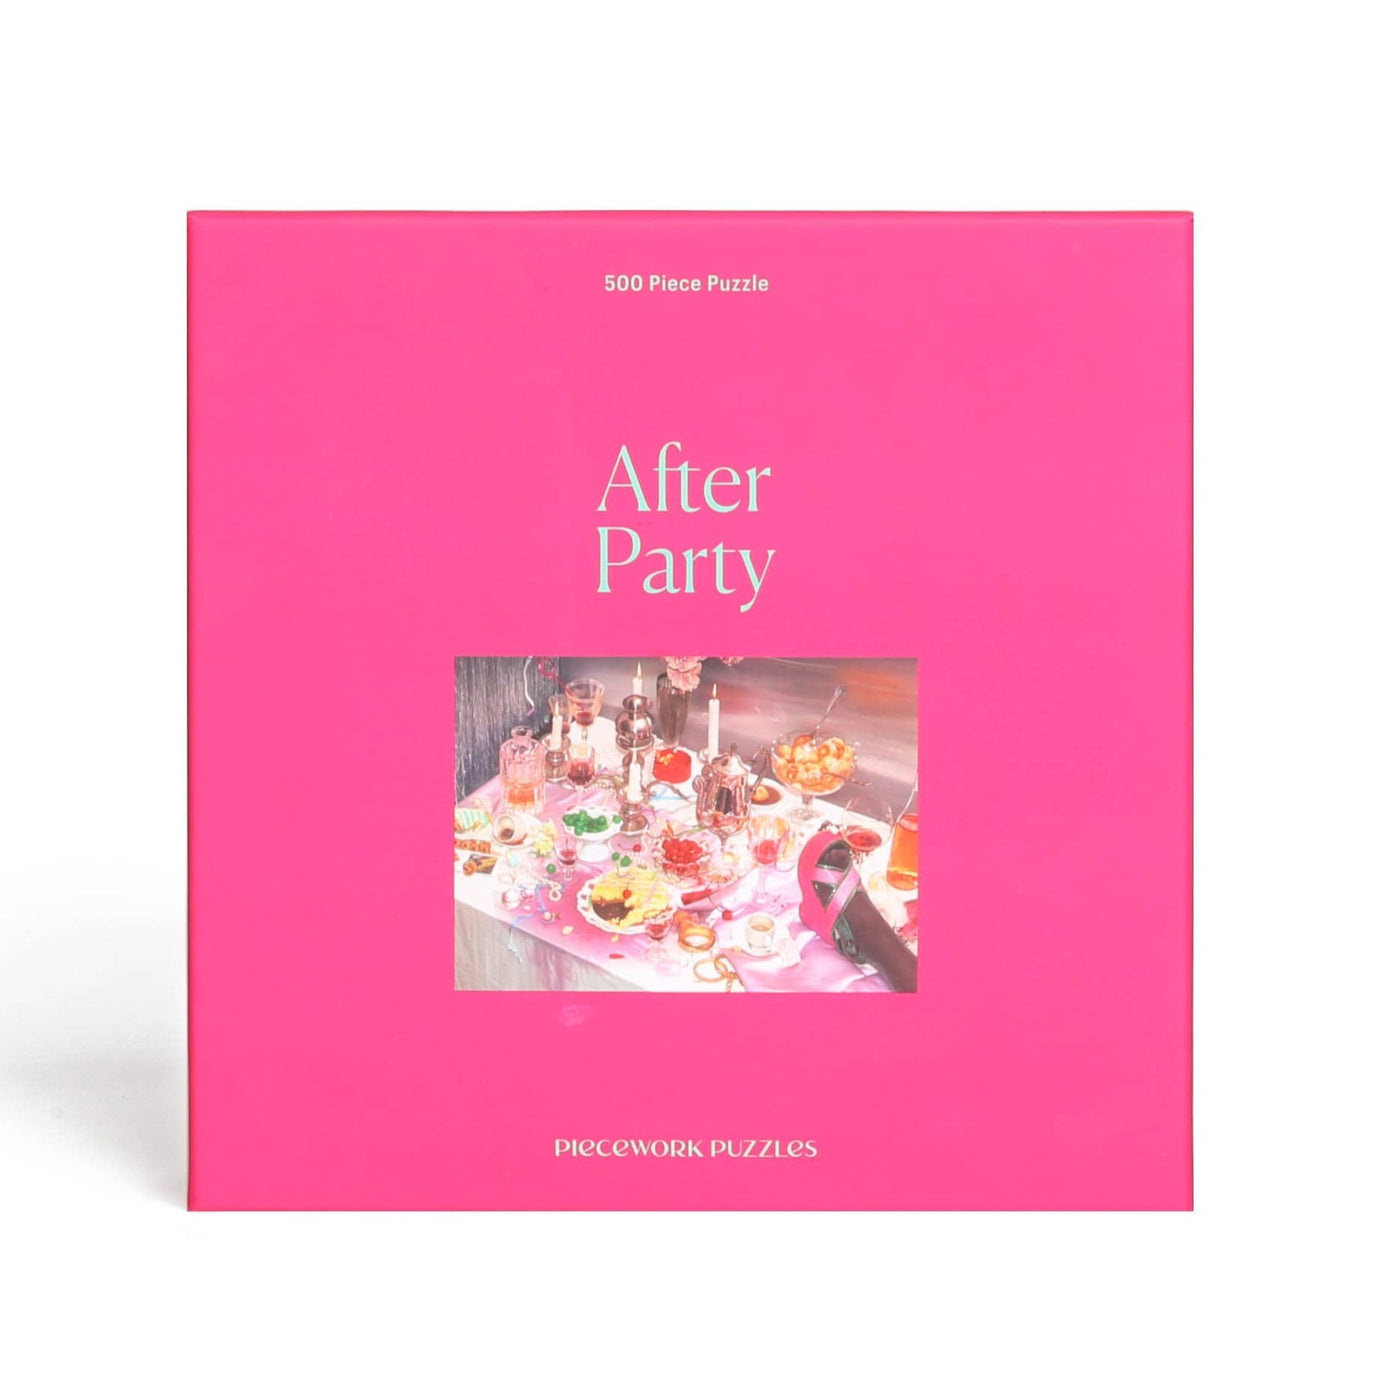 After Party | 500 Piece Jigsaw Puzzle